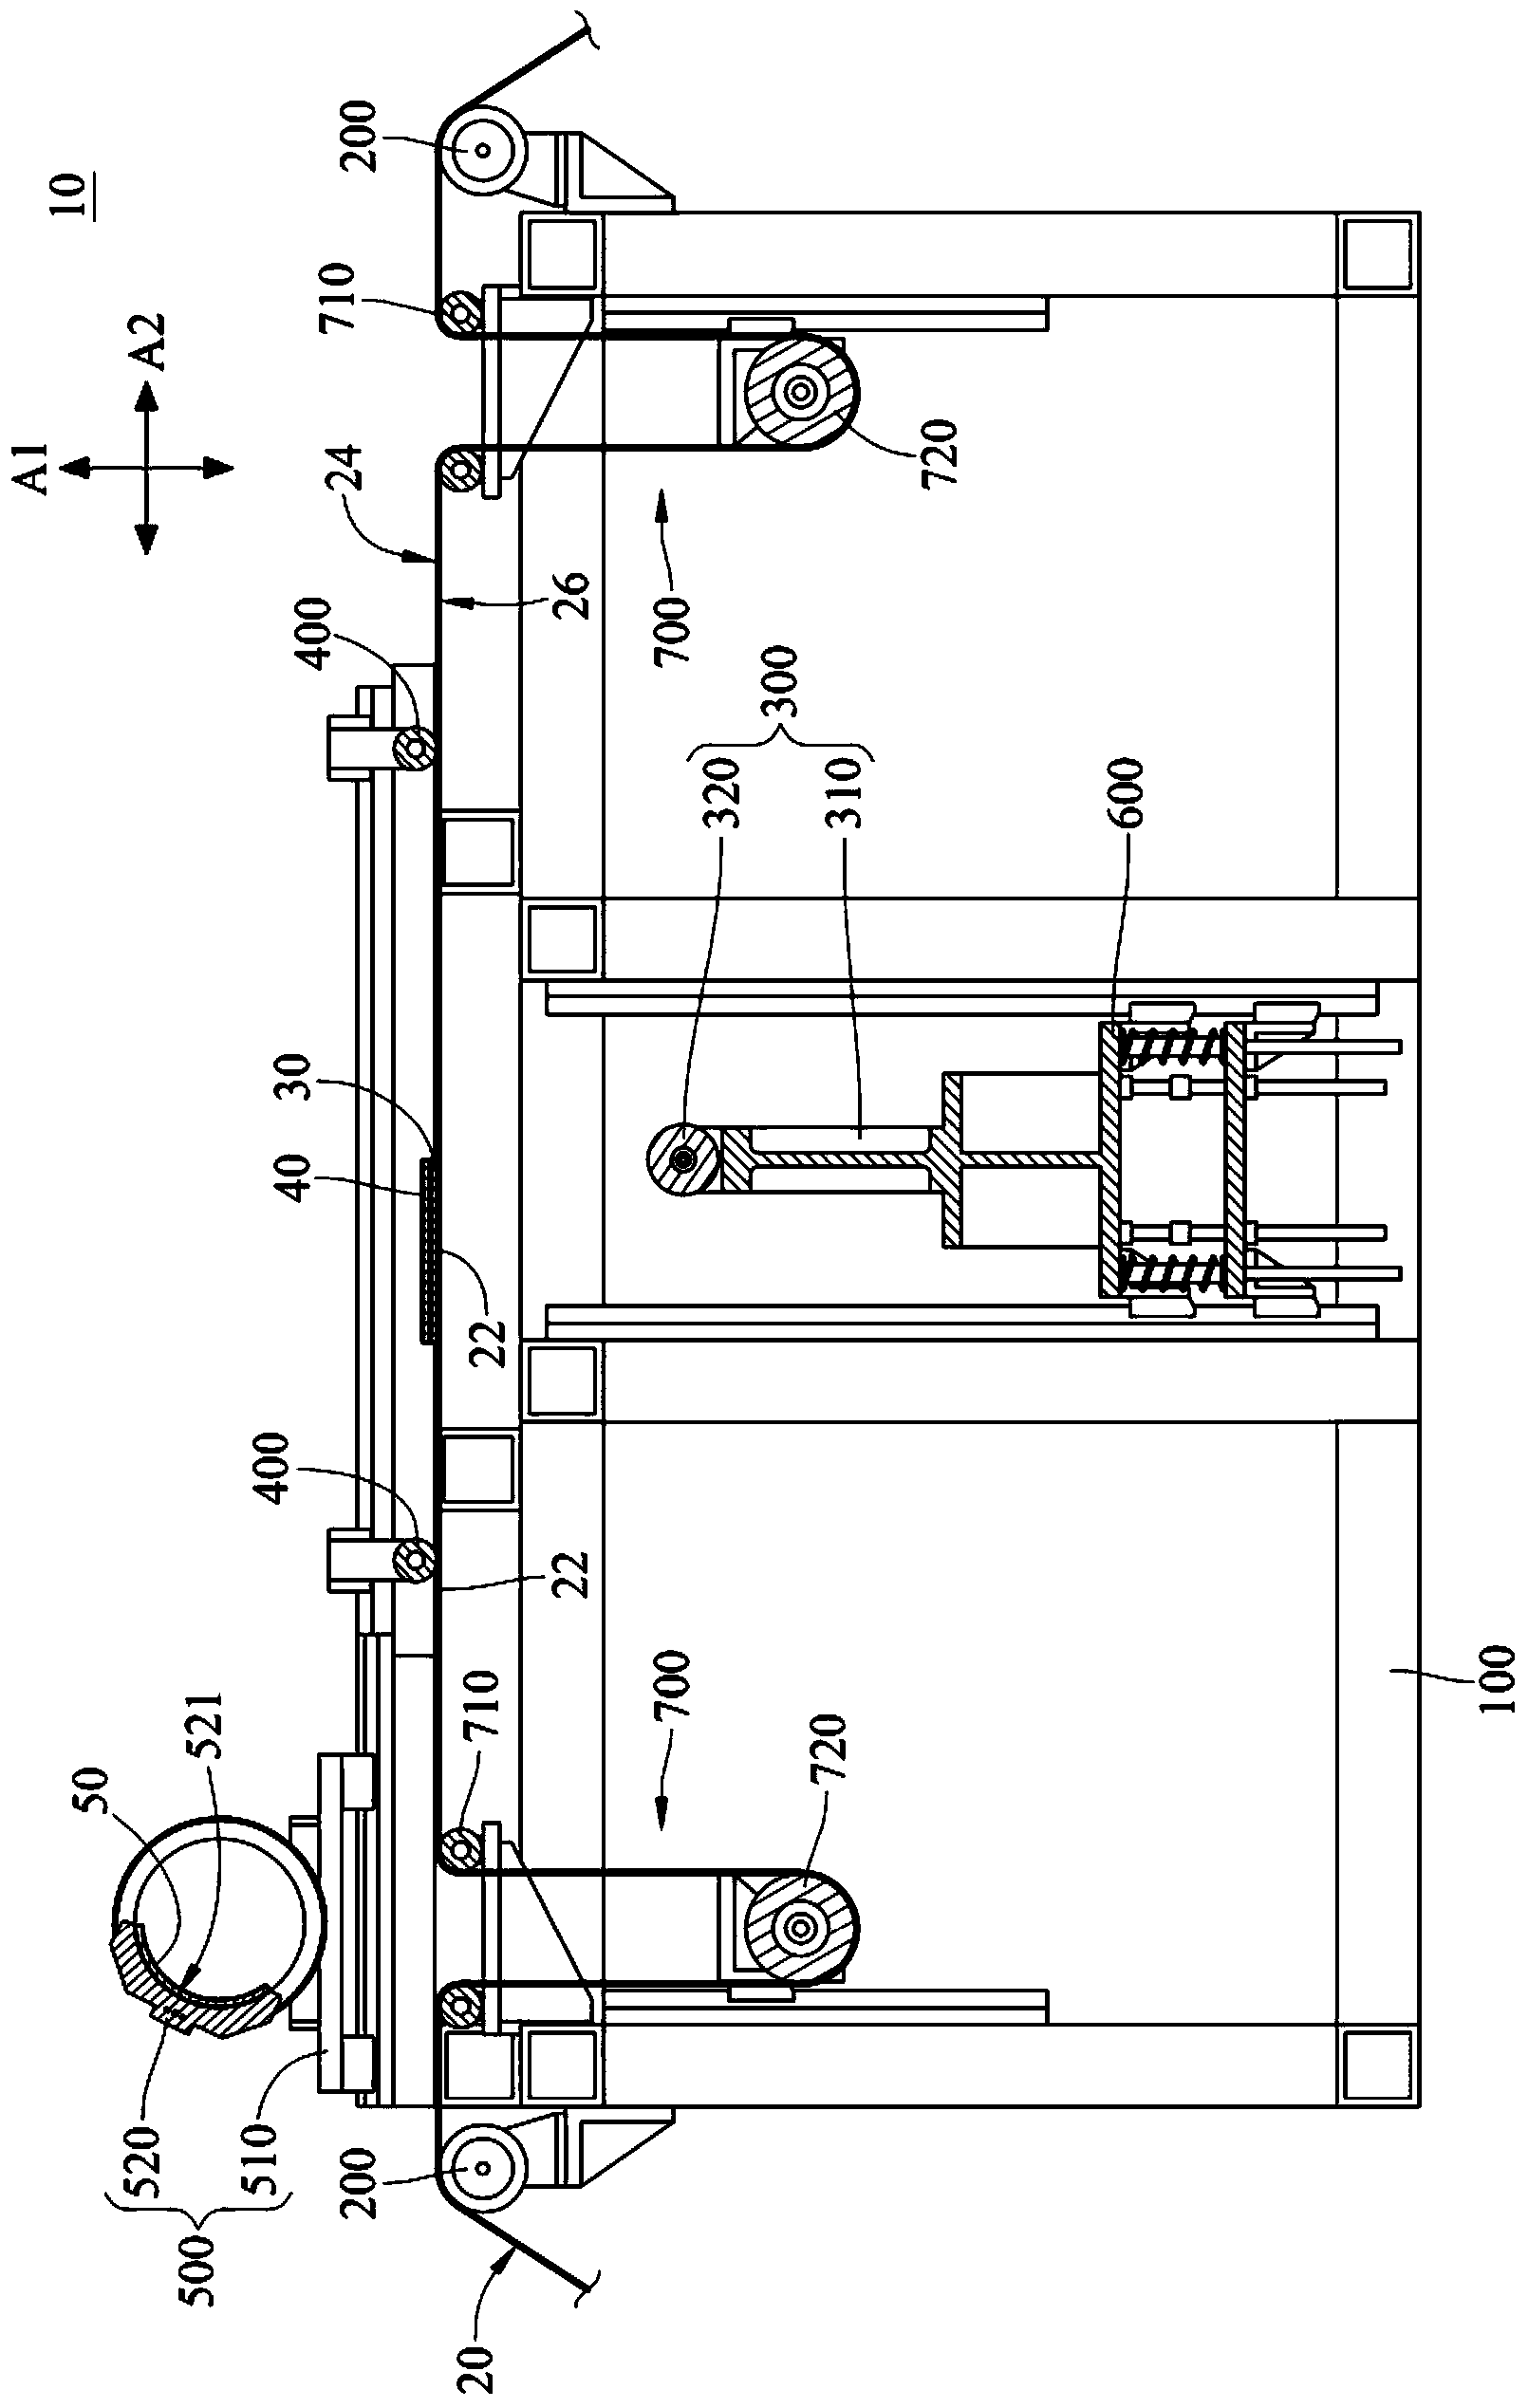 Curved surface laminating device